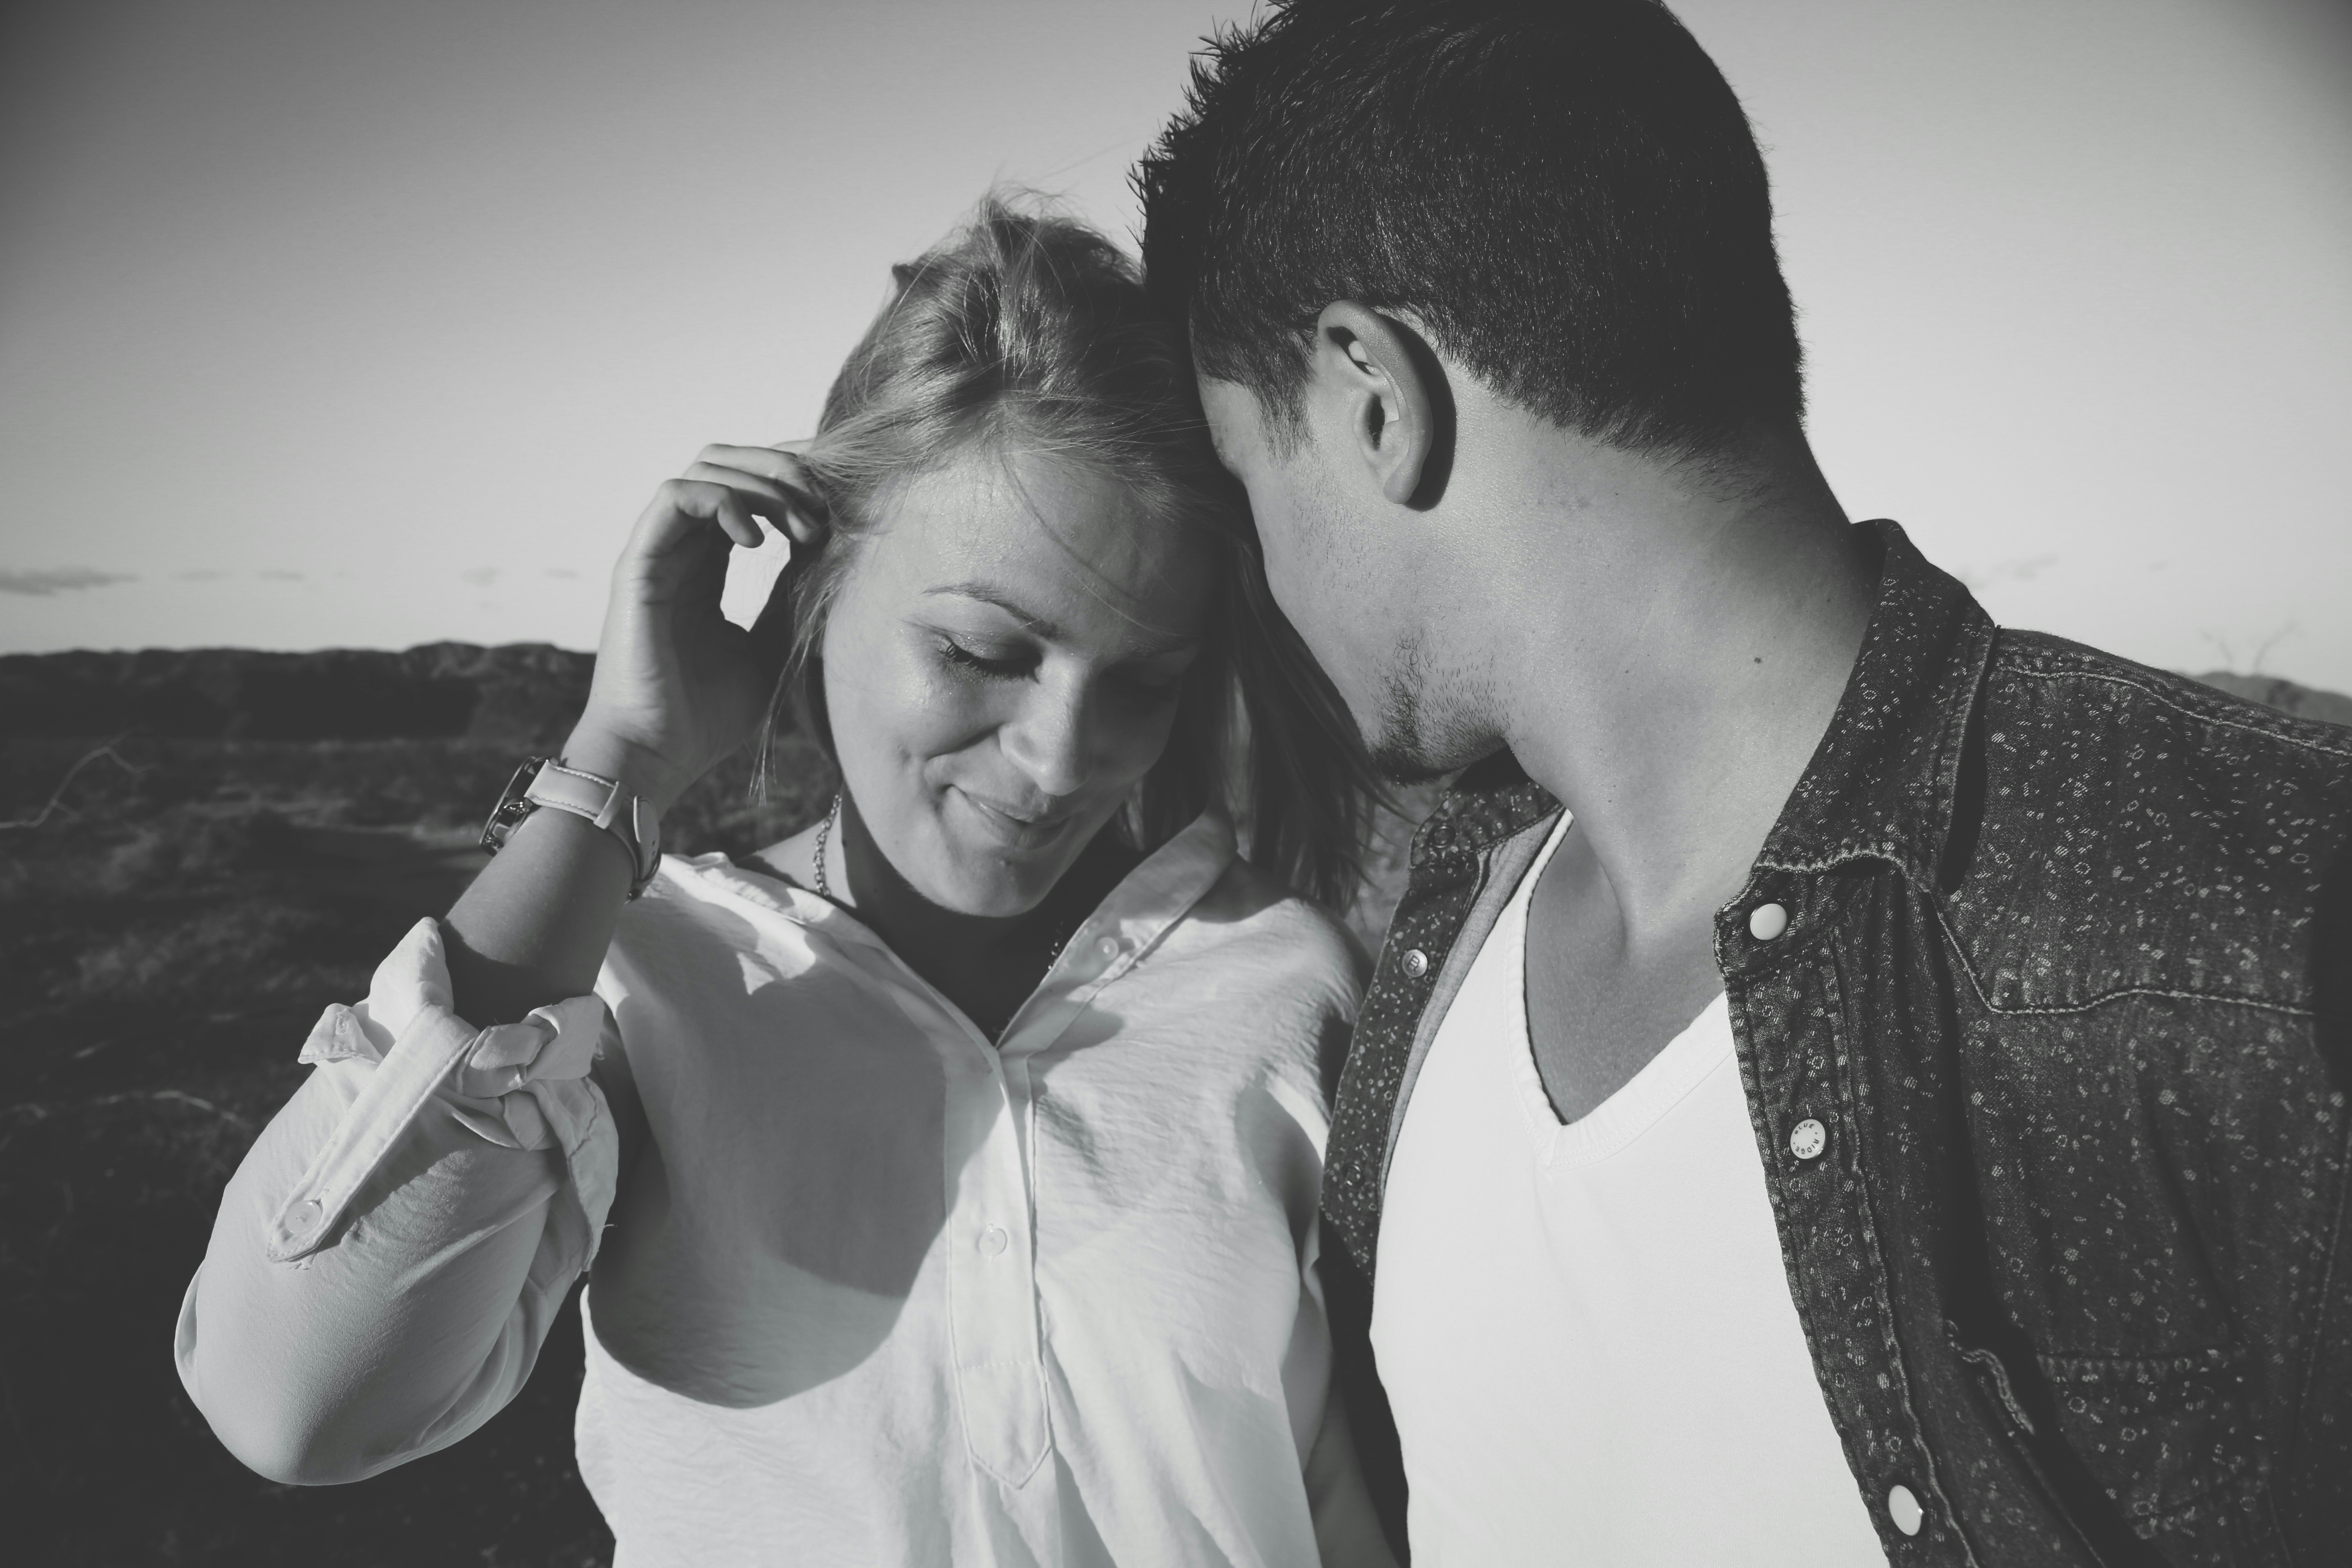 Grayscale image of a couple | Source: Unsplash